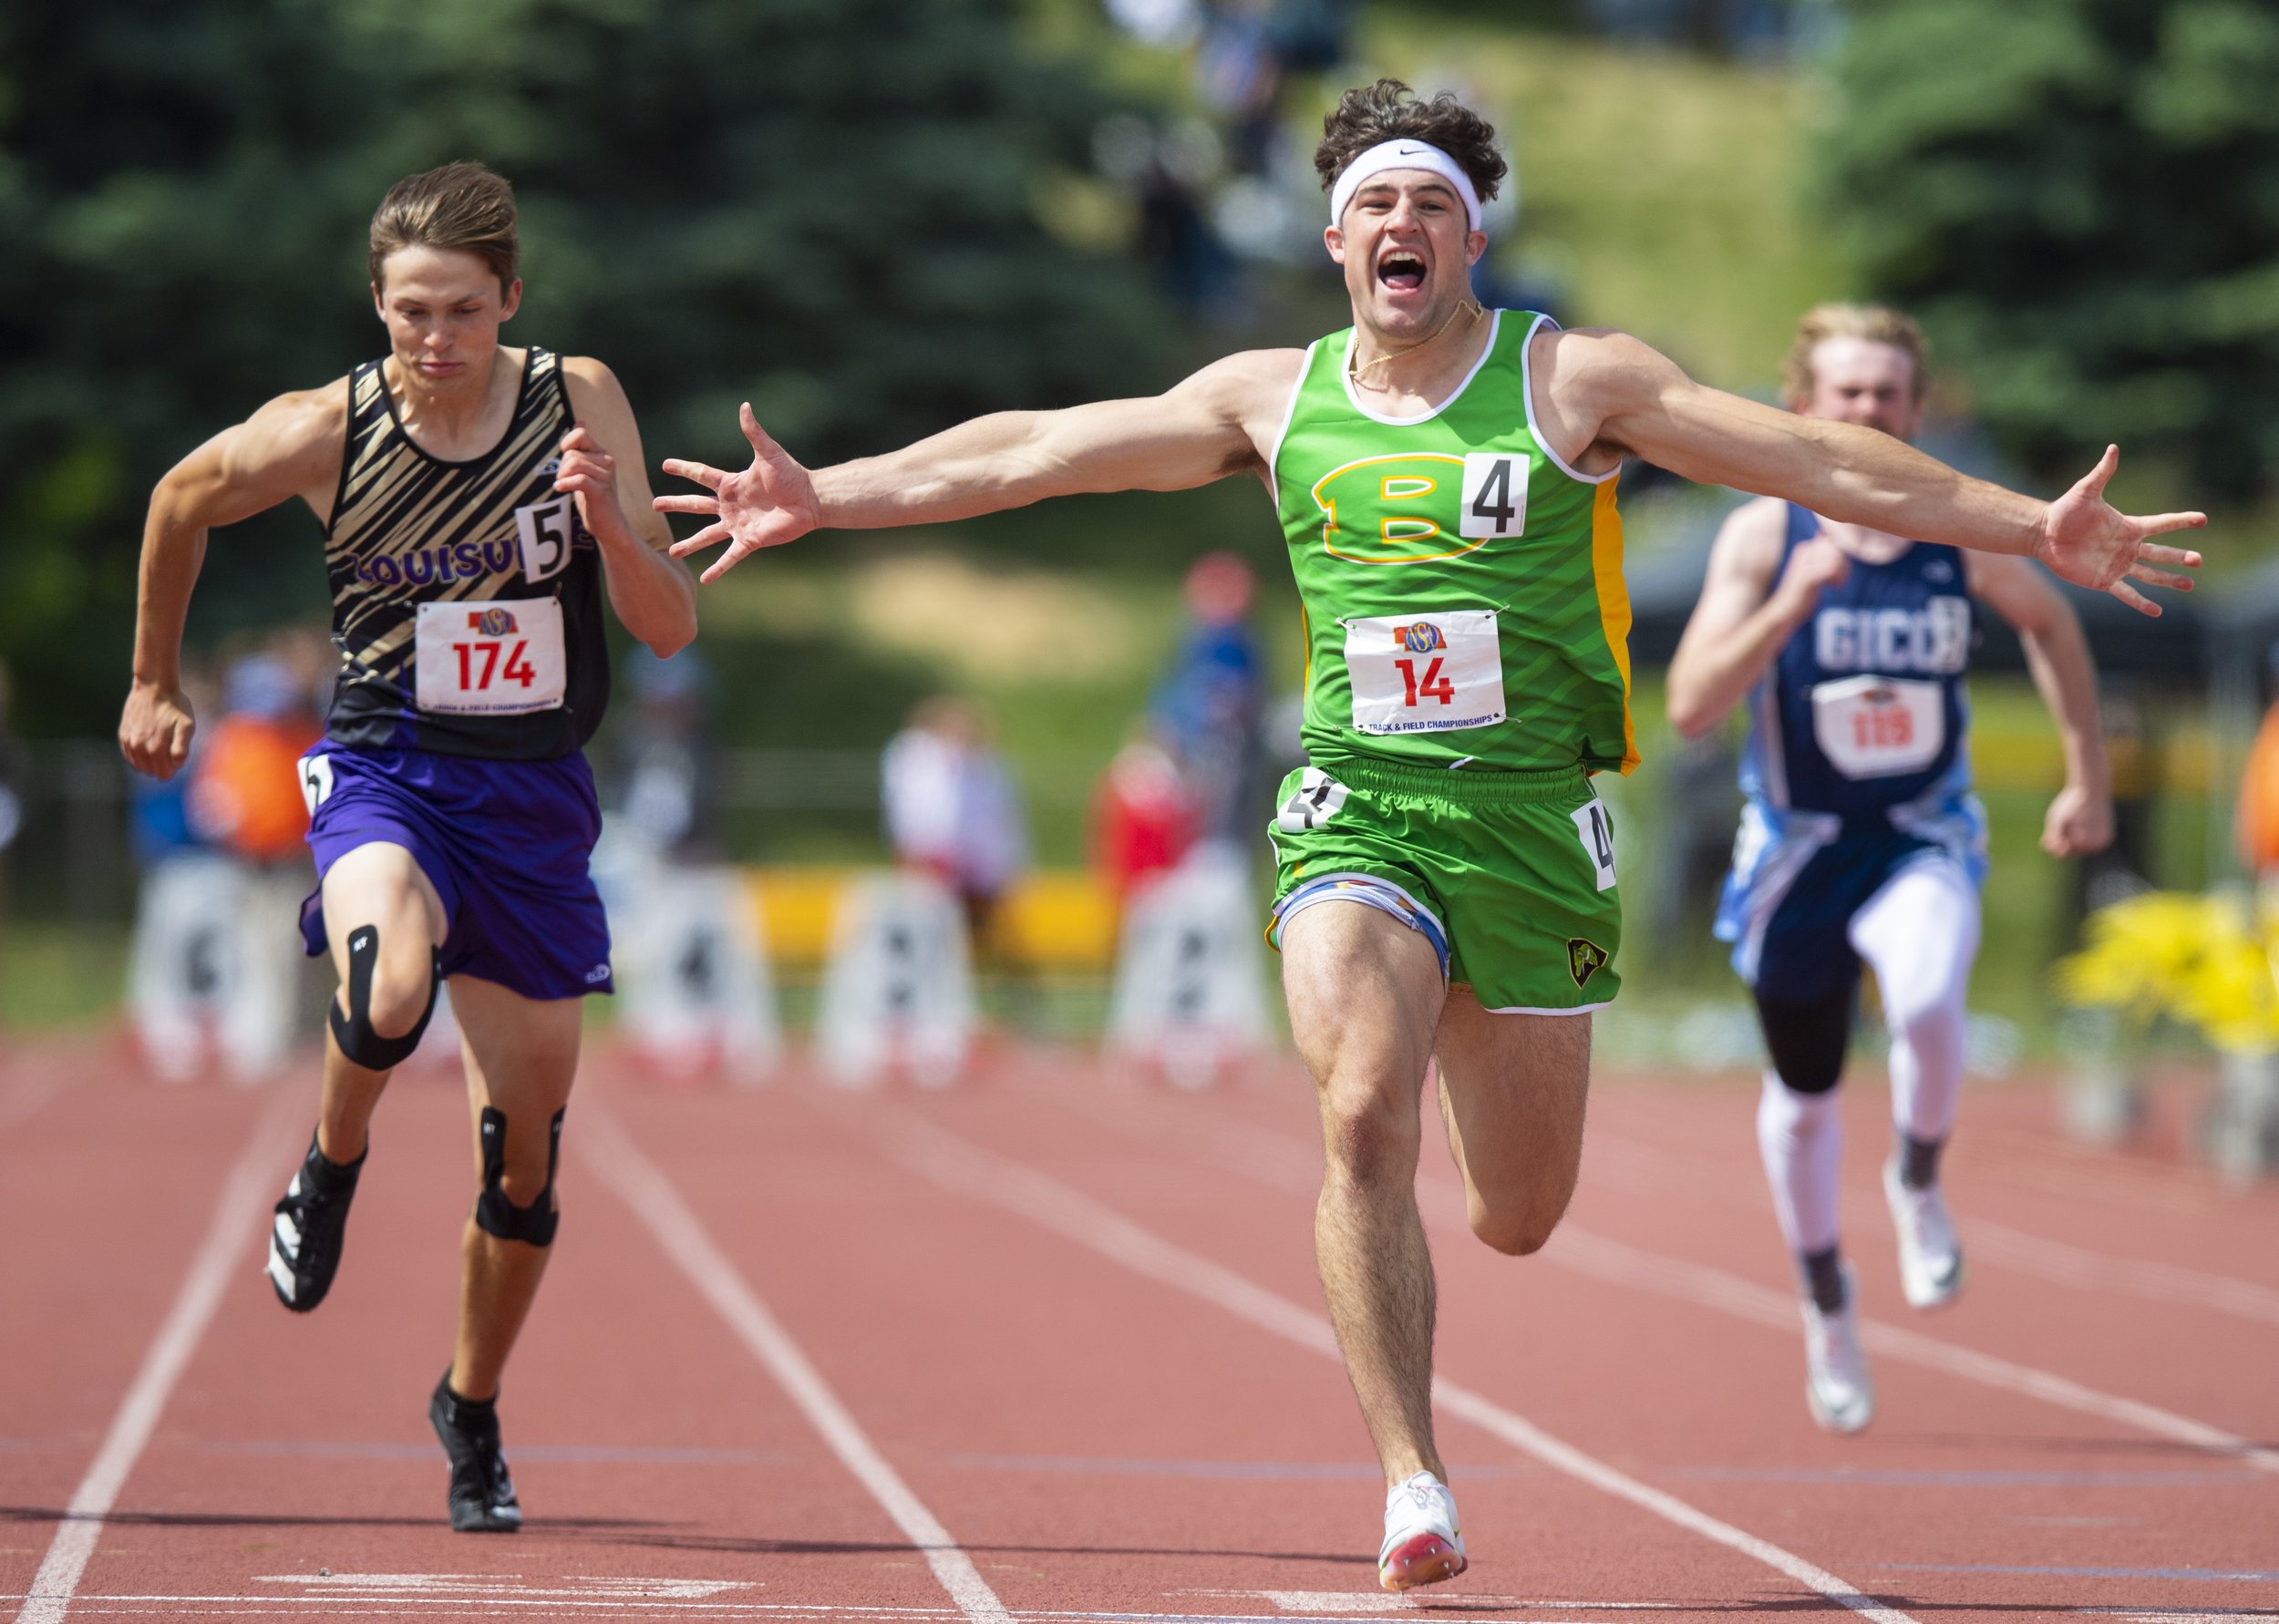  Arch Bishop's Koa McIntyre celebrates as he crosses the finish line in the Class C boys 100 meter dash during the state track championships at Burke Stadium on May 21, 2022, in Omaha, Nebraska 